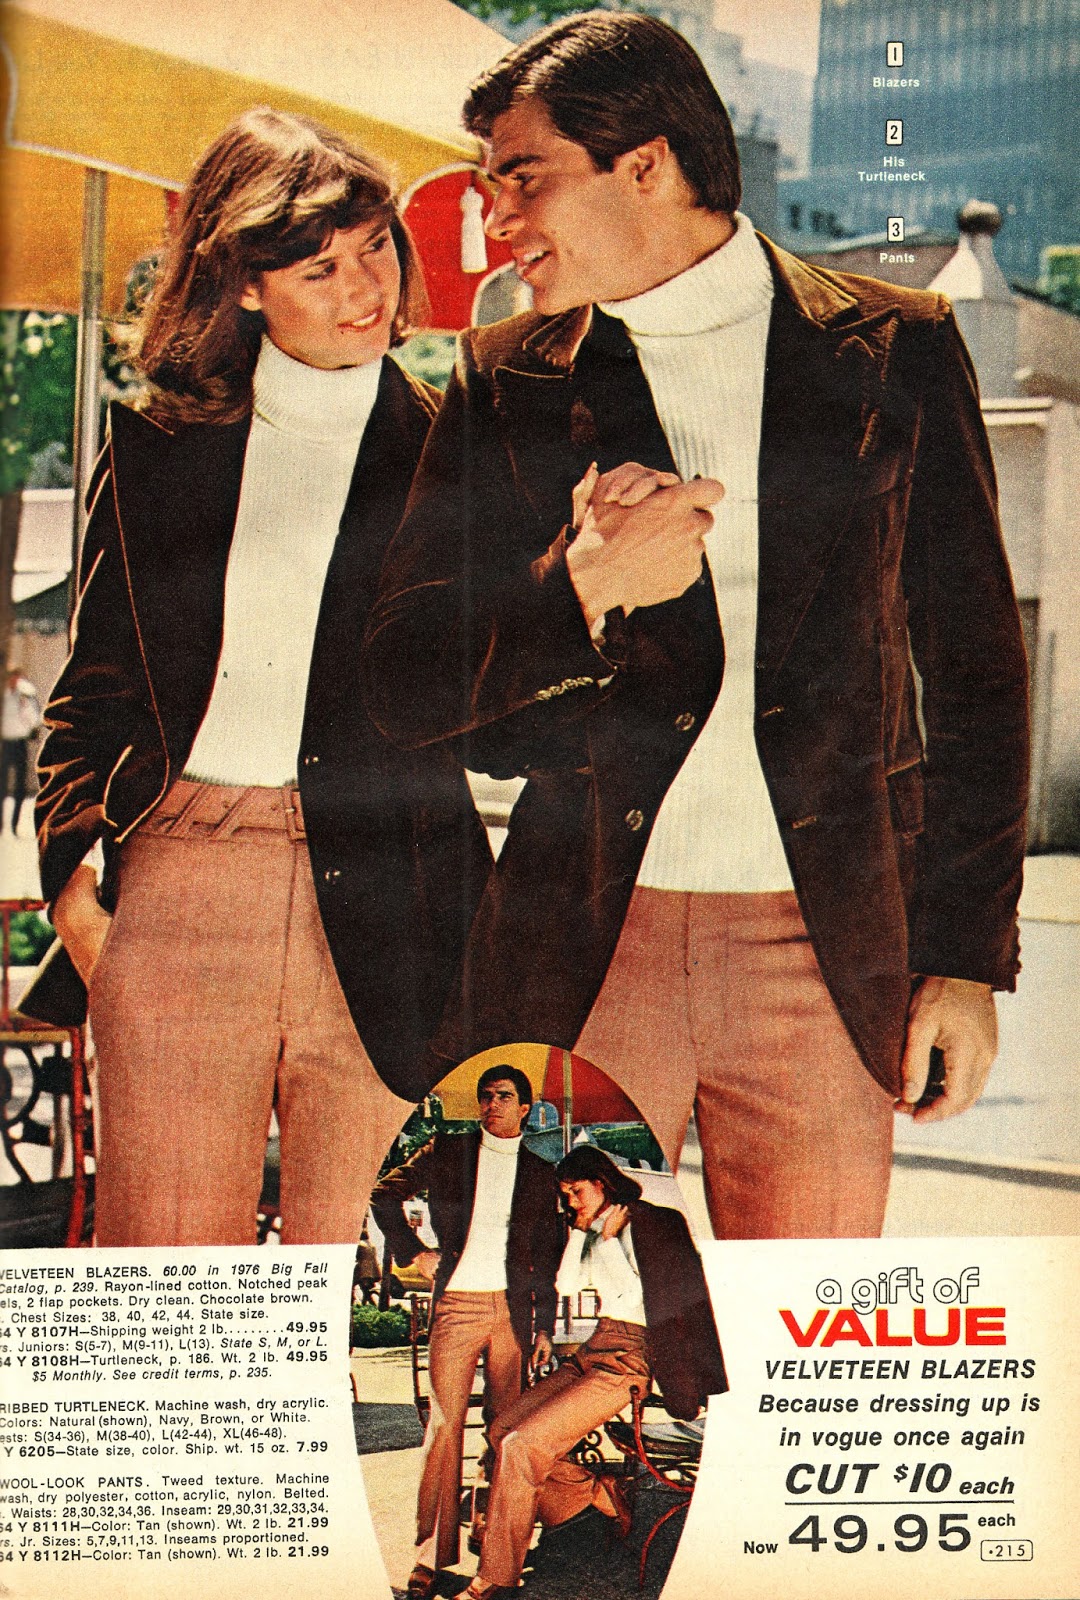 Plaid Stallions : Rambling and Reflections on '70s pop culture